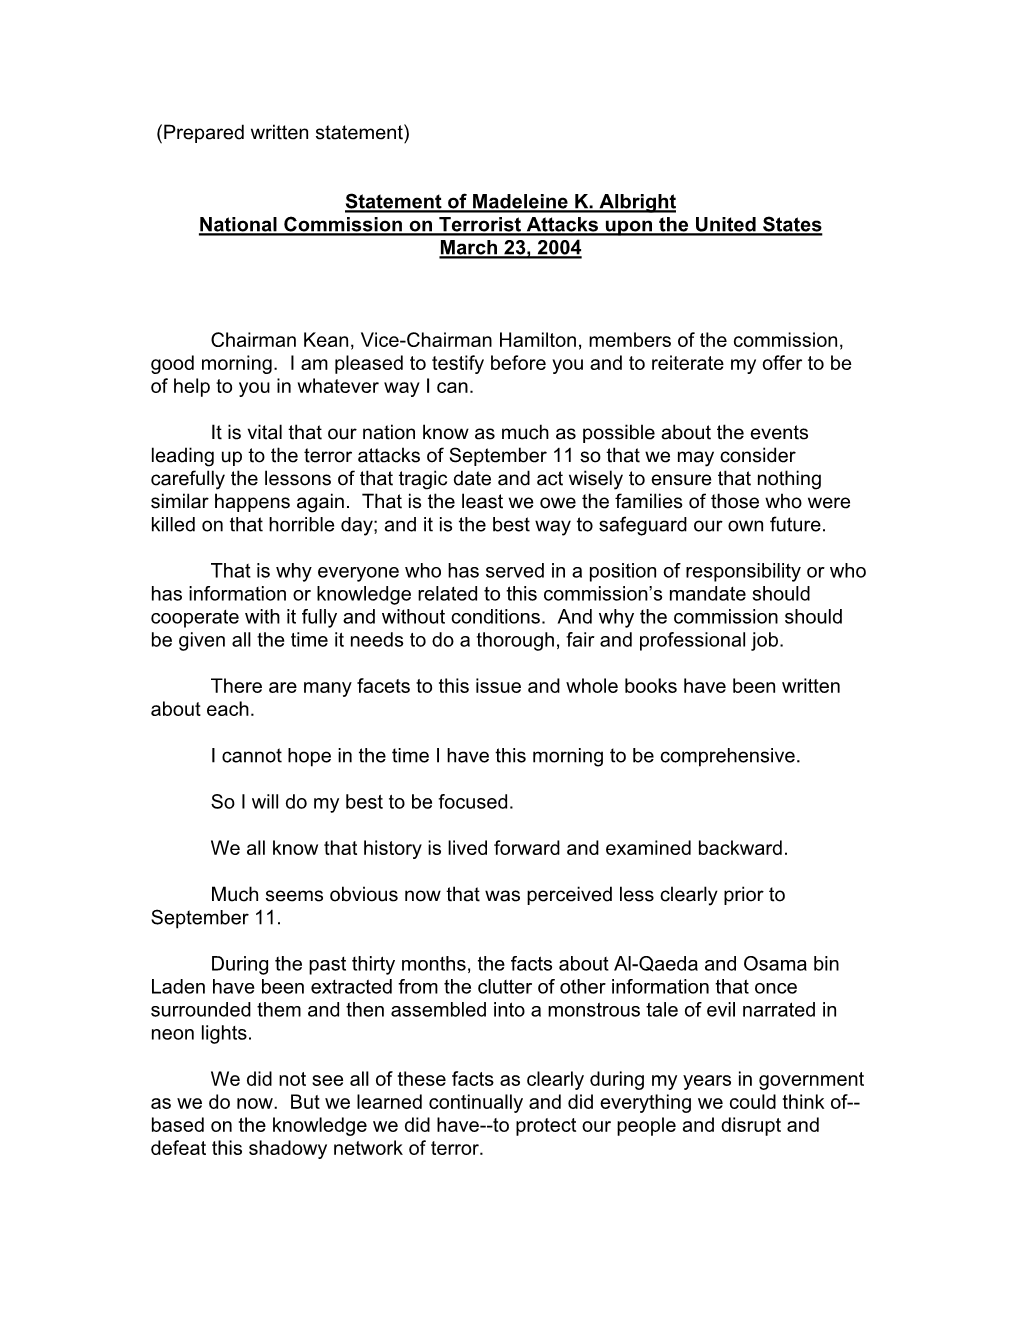 Statement of Madeleine K. Albright National Commission on Terrorist Attacks Upon the United States March 23, 2004